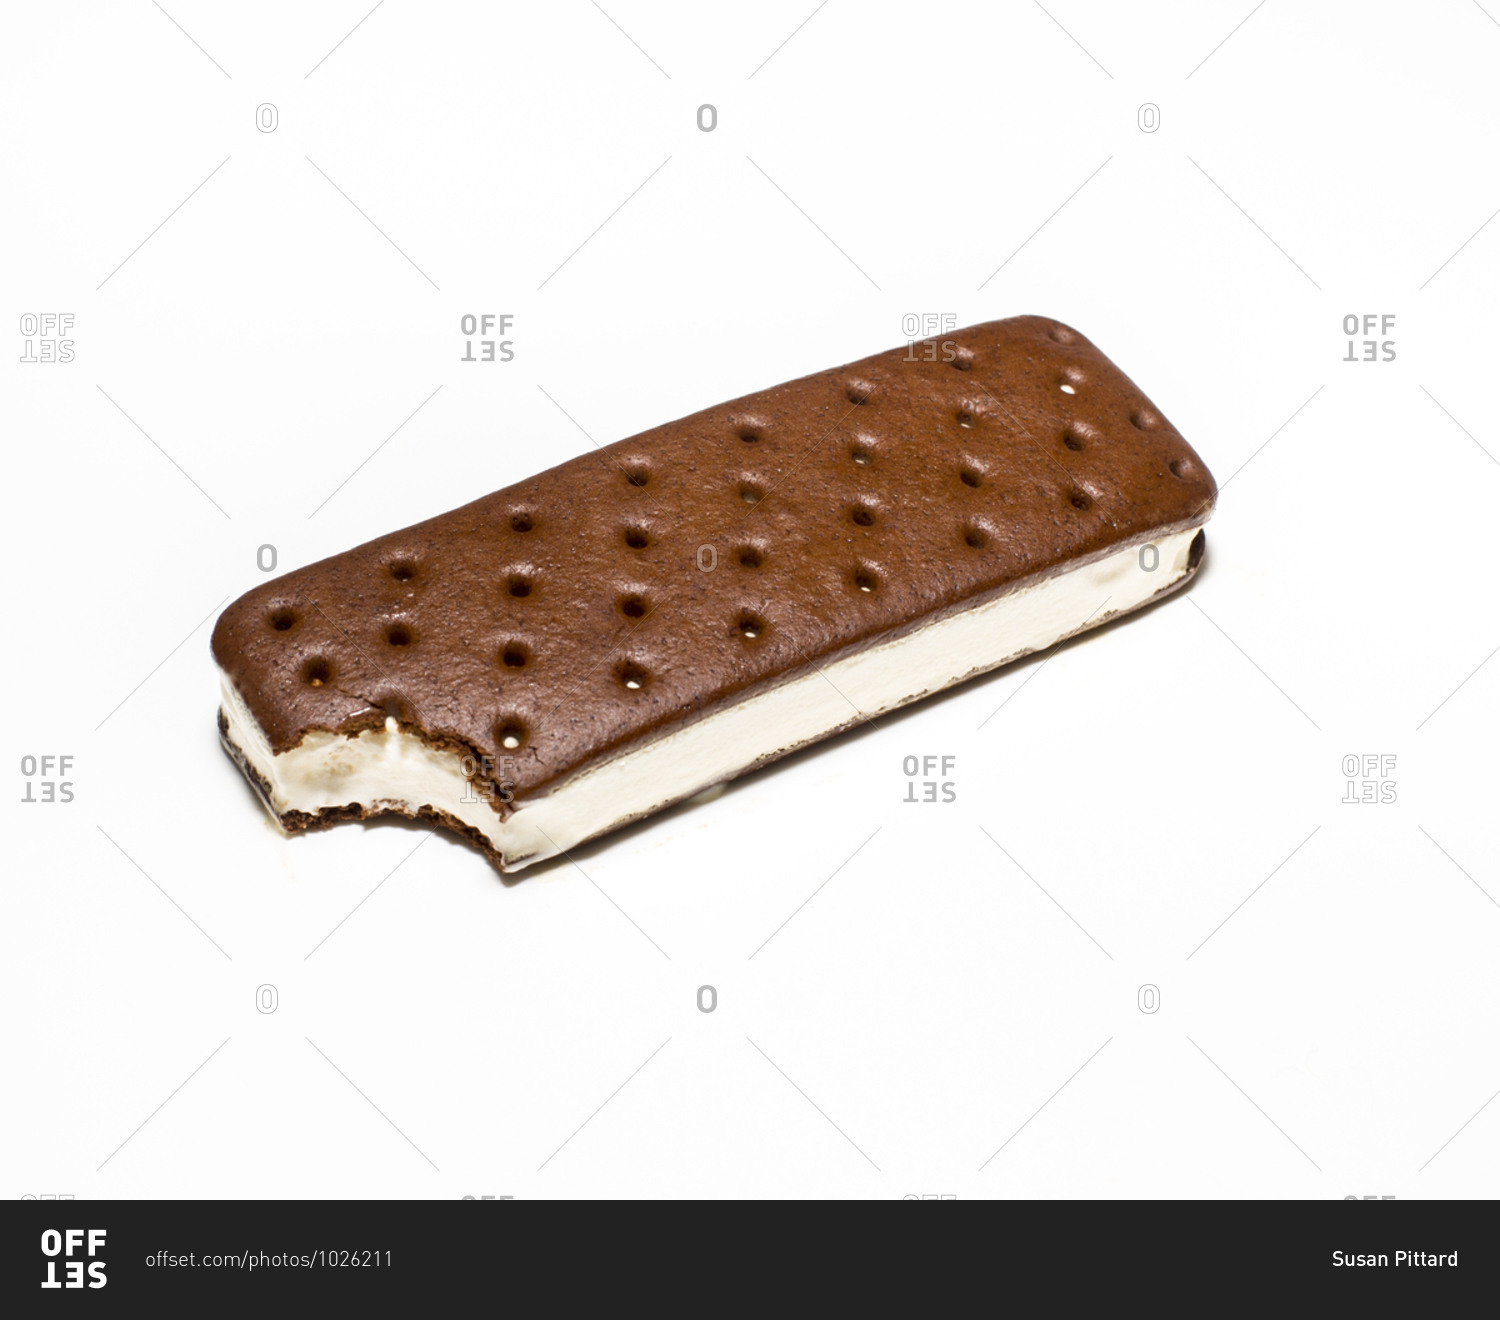 Ice cream sandwich missing a bite on white surface